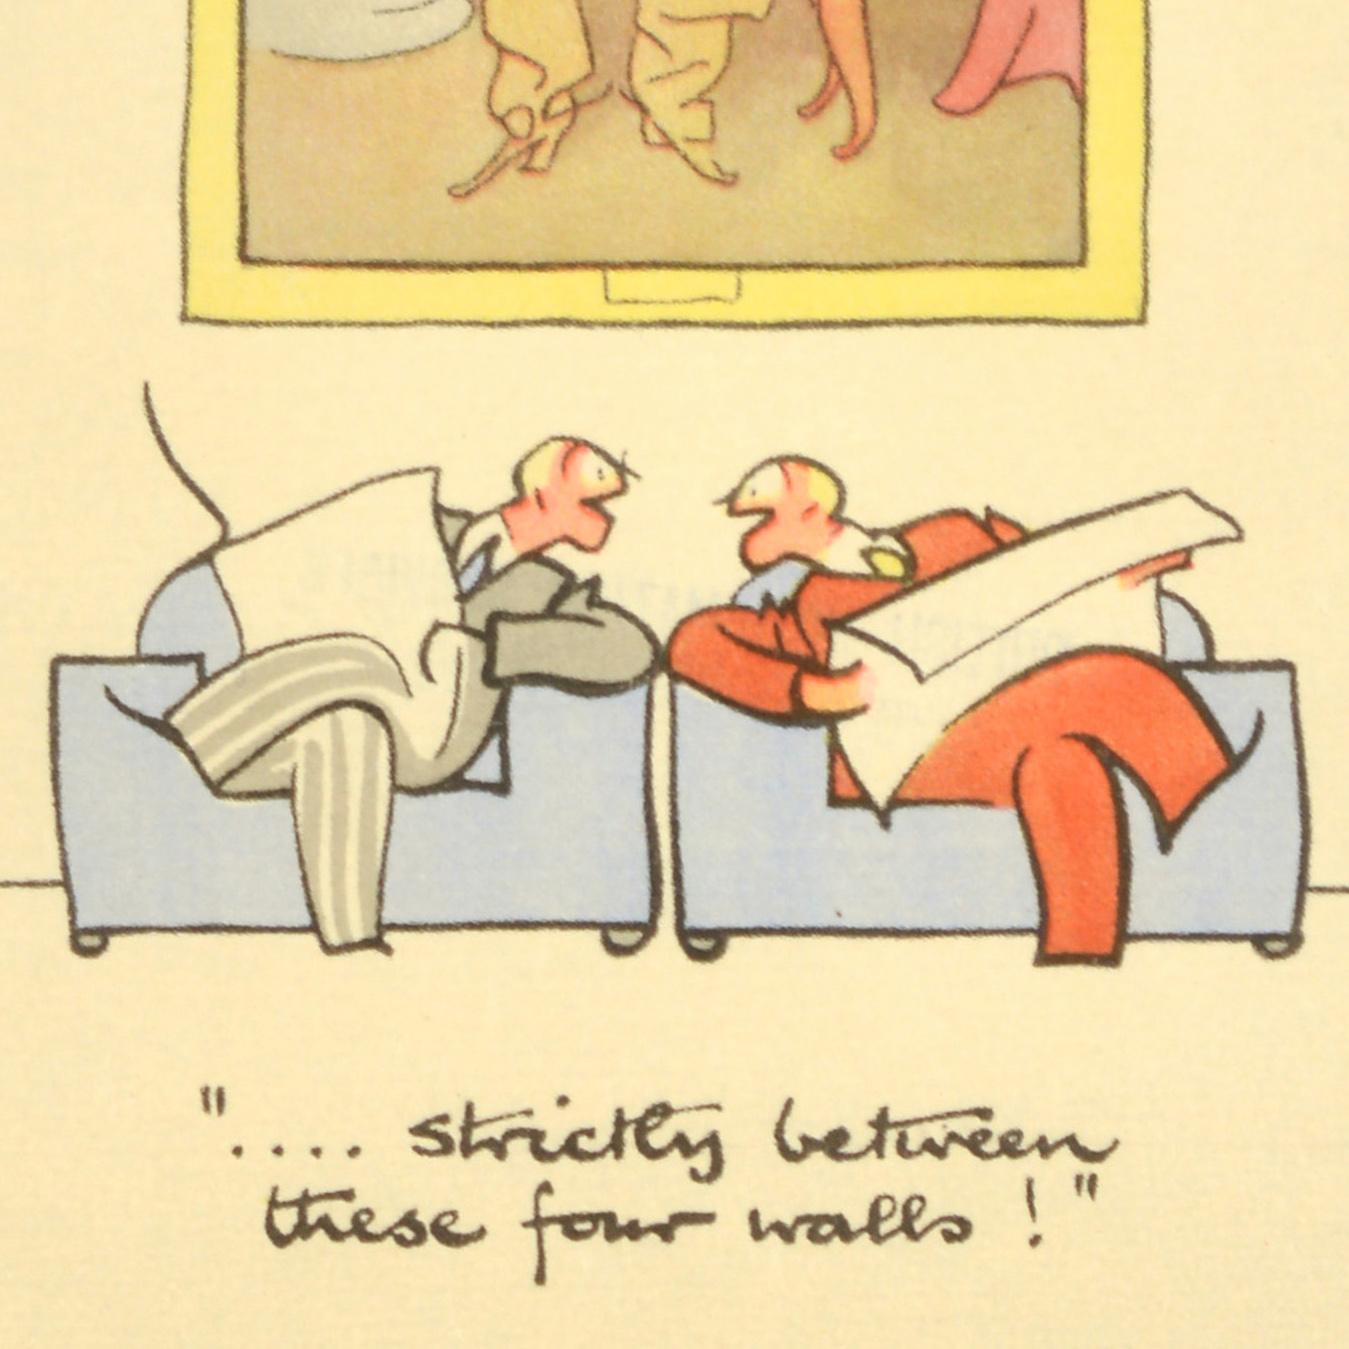 Original Vintage War Poster Careless Talk Costs Lives Four Walls WWII Fougasse - Print by Fougasse (Cyril Kenneth Bird)